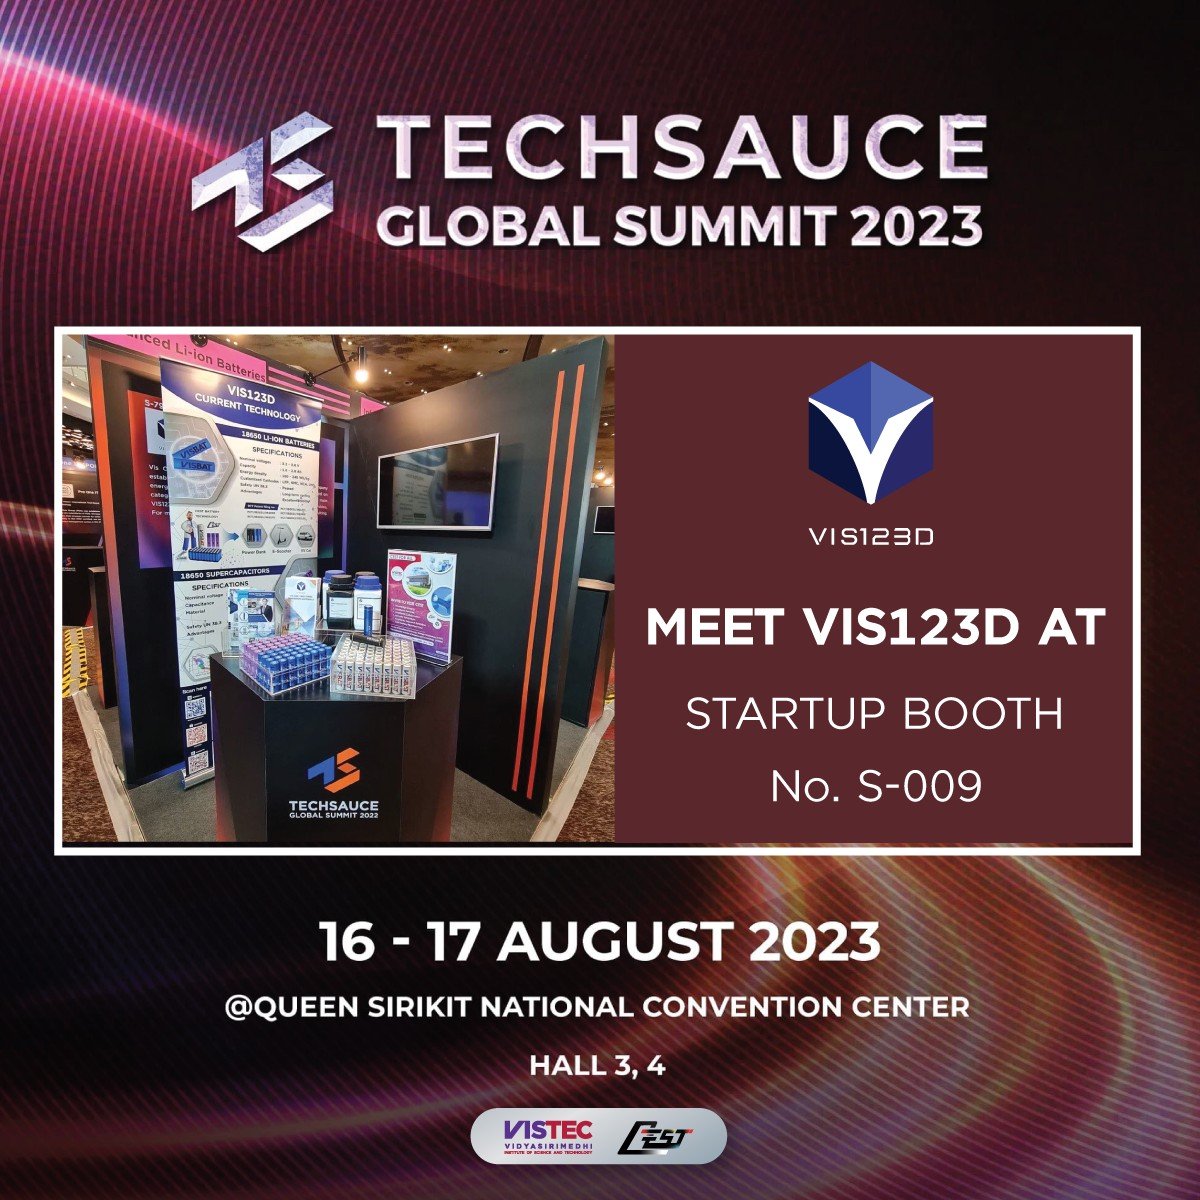 VIS123D at the Techsauce Global Summit in 2023 